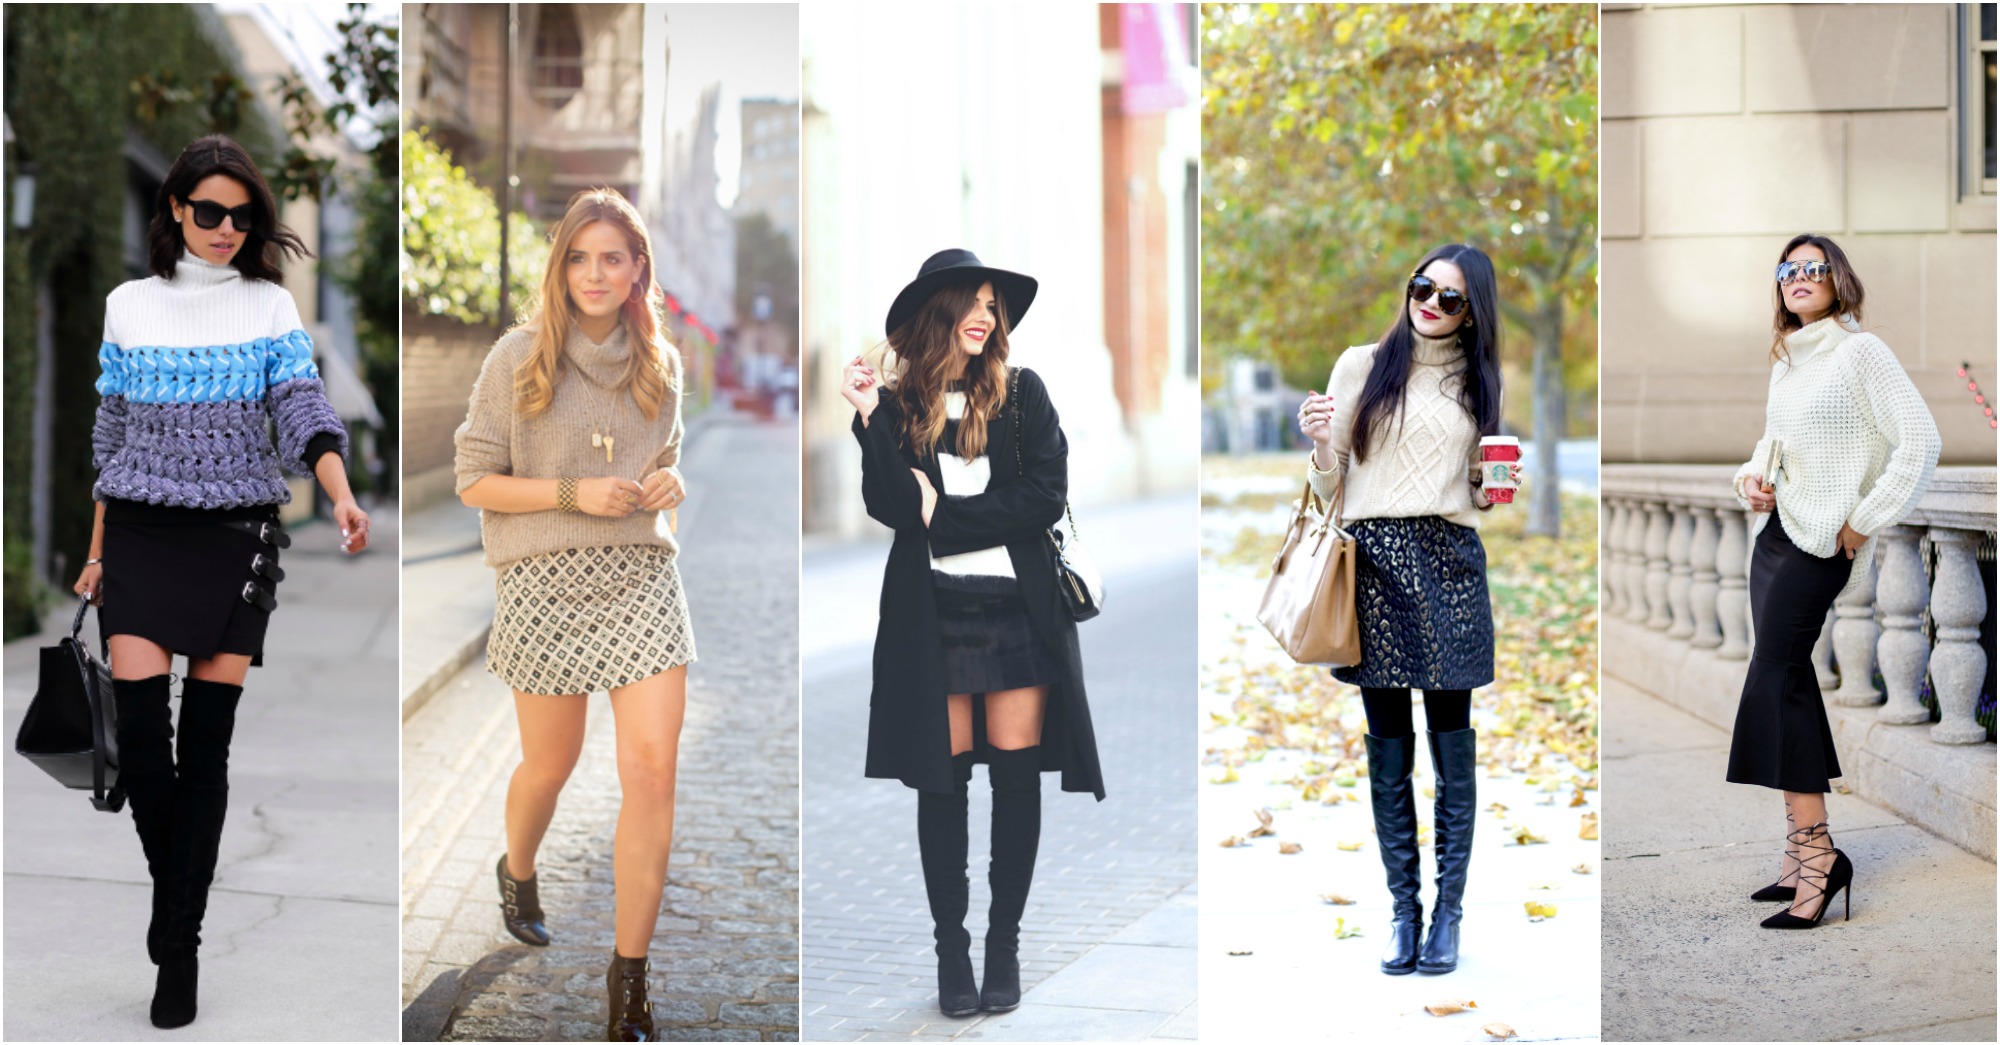 15 Of The Best Ways To Wear Sweater And Skirt Together - fashionsy.com